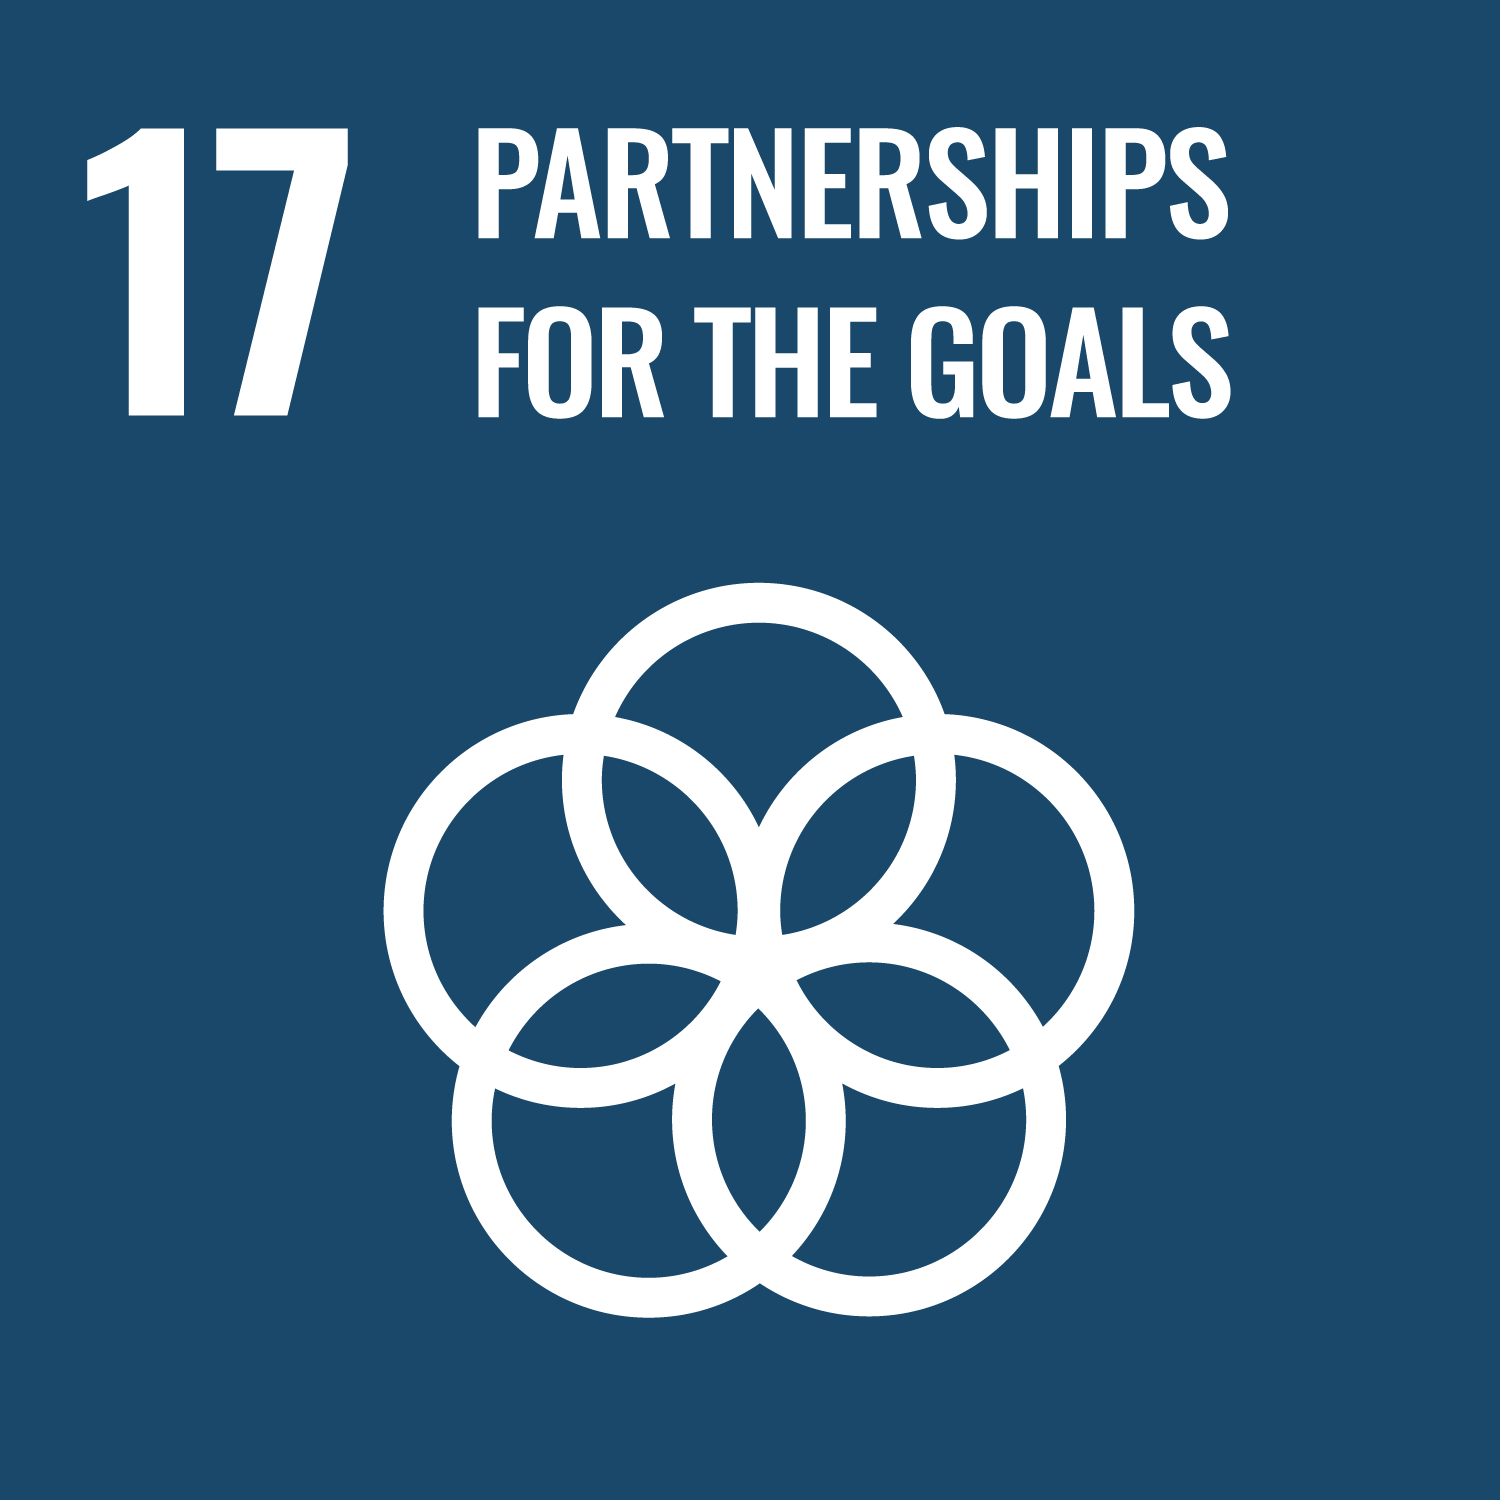 United Nations Sustainable Development Goal Number 17: Partnership for the Goals